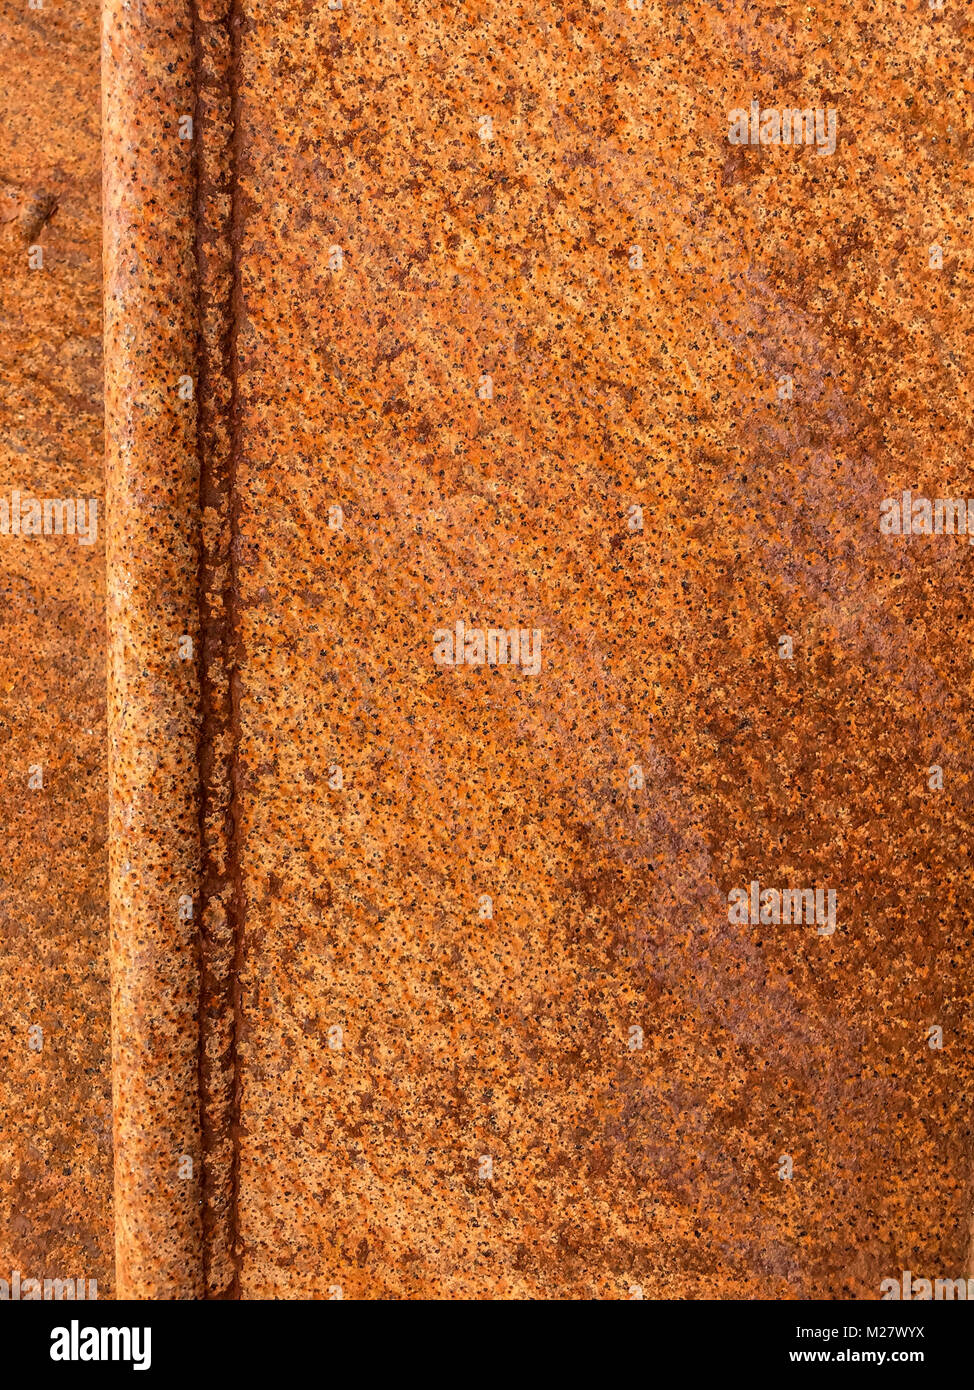 Full frame shot of rusty metal texture. Stock Photo